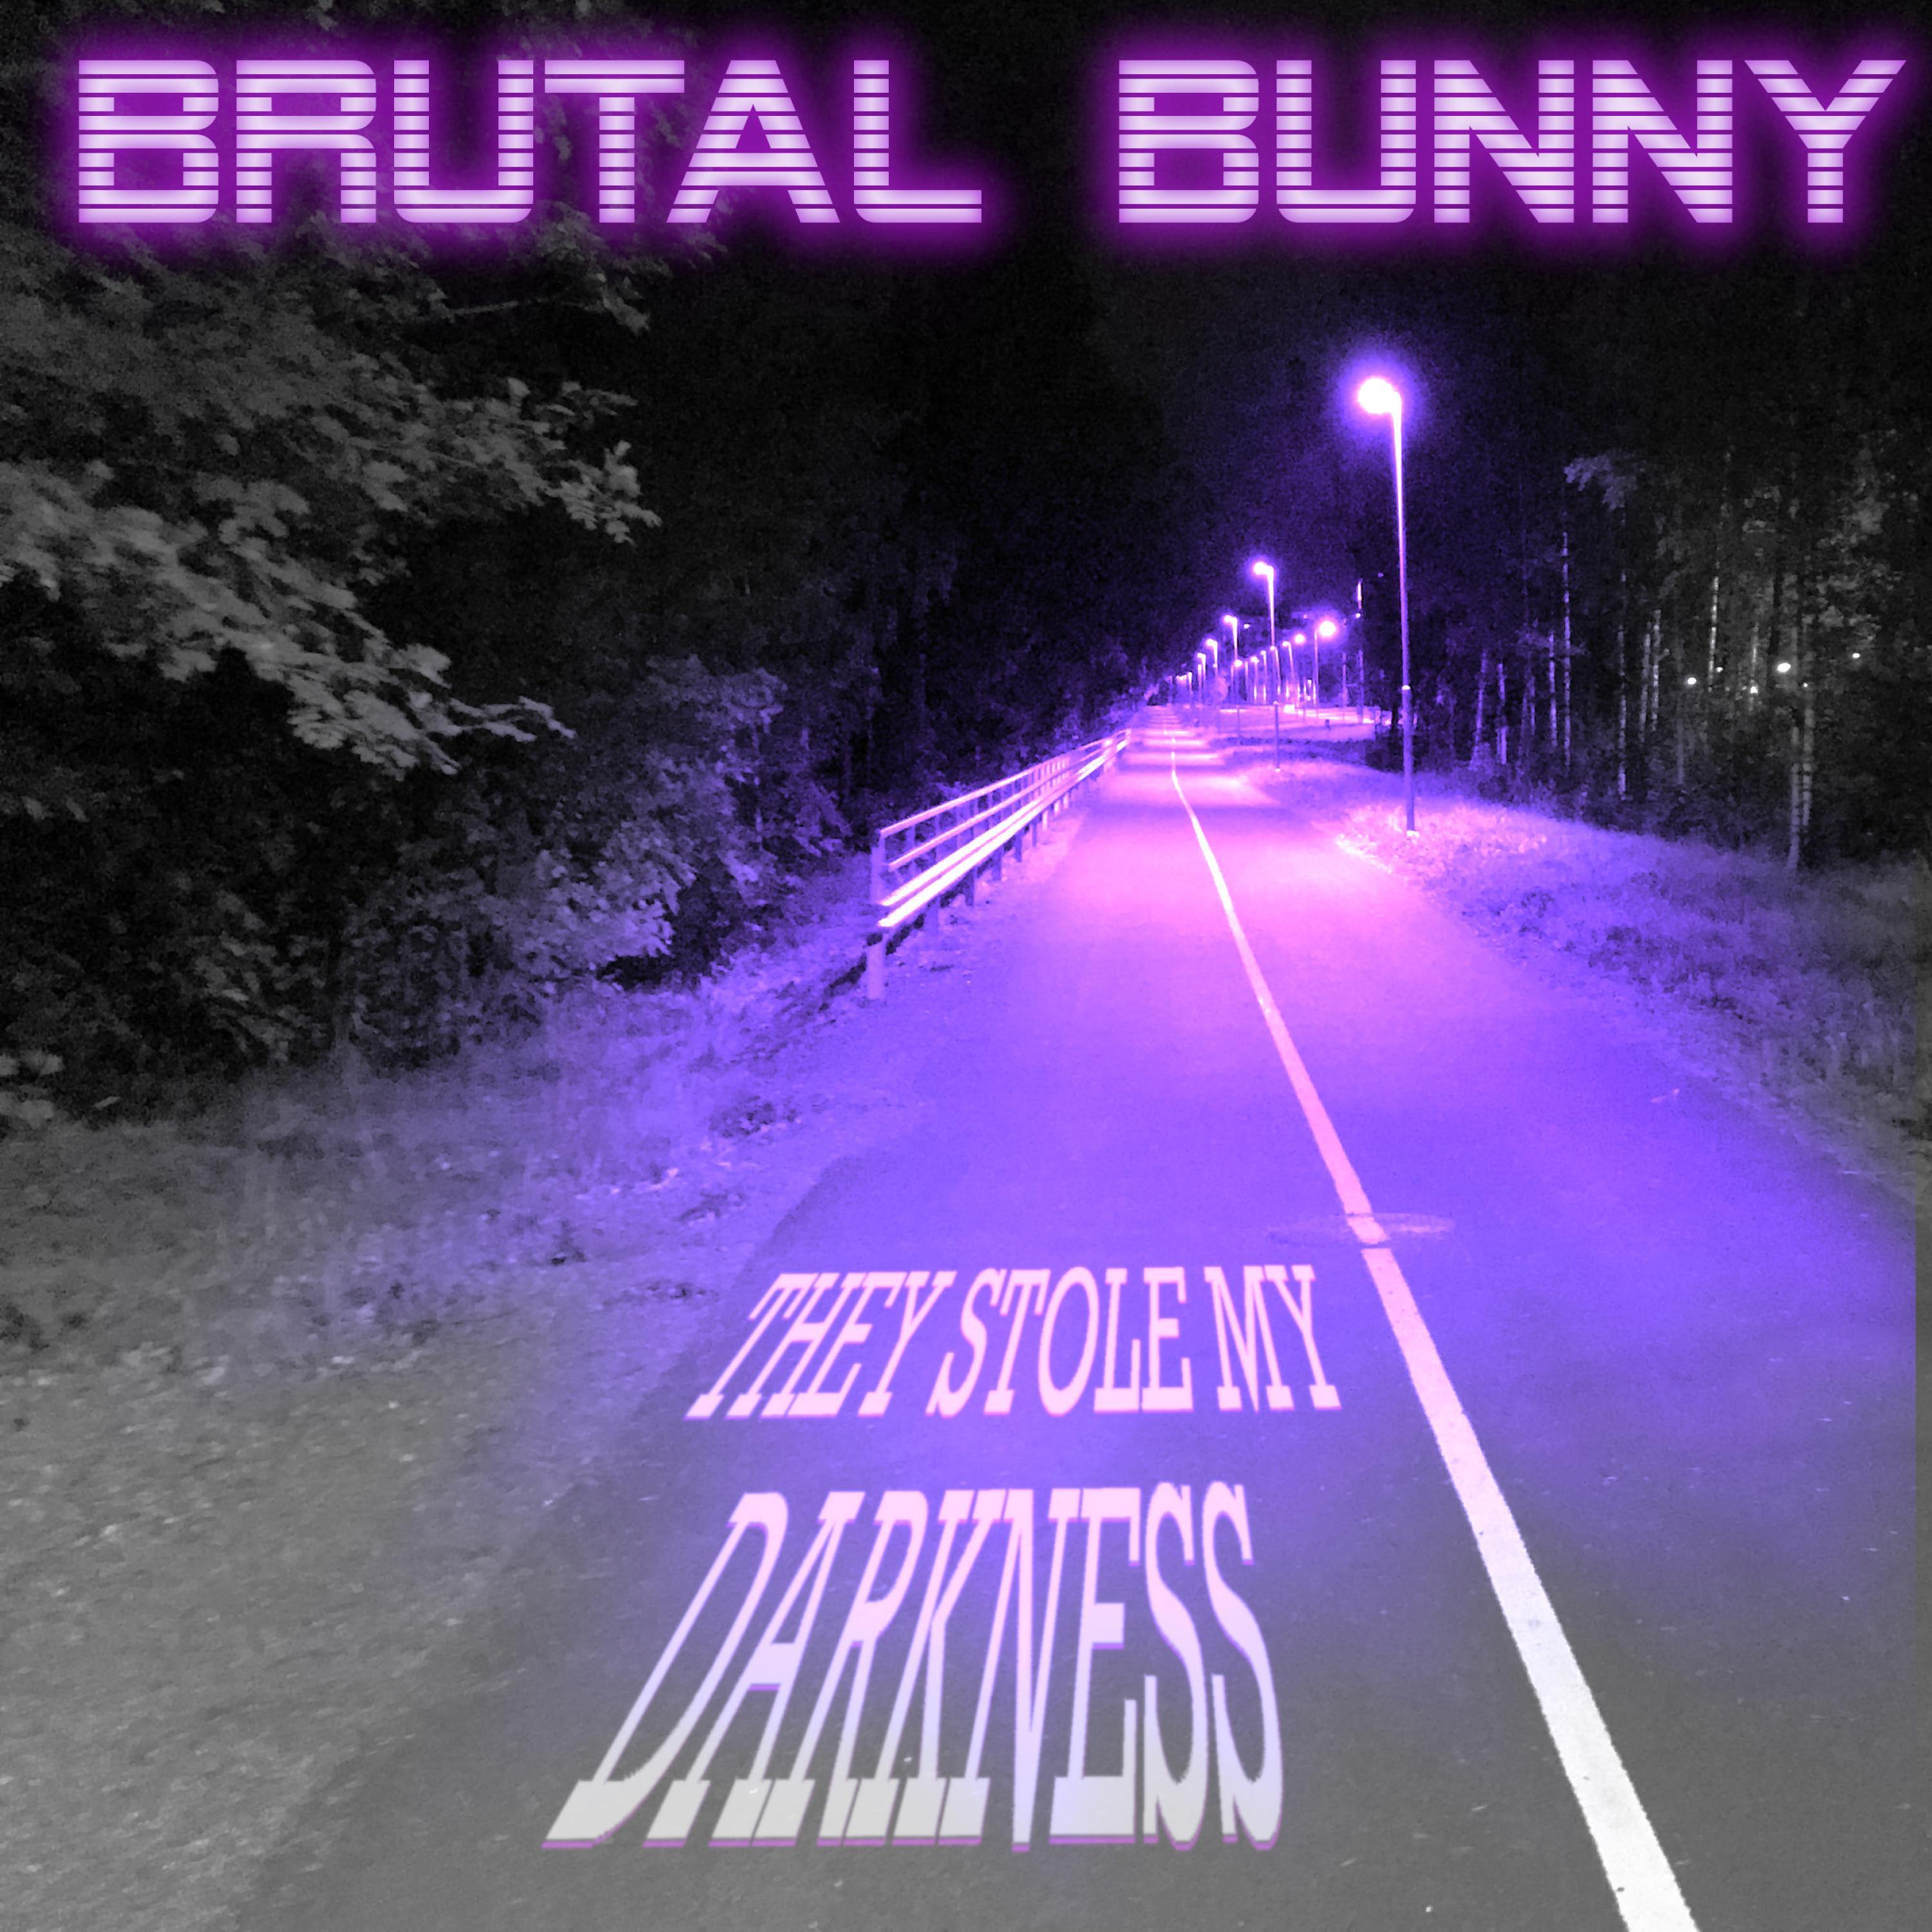 Brutal Bunny - They Stole My Darkness